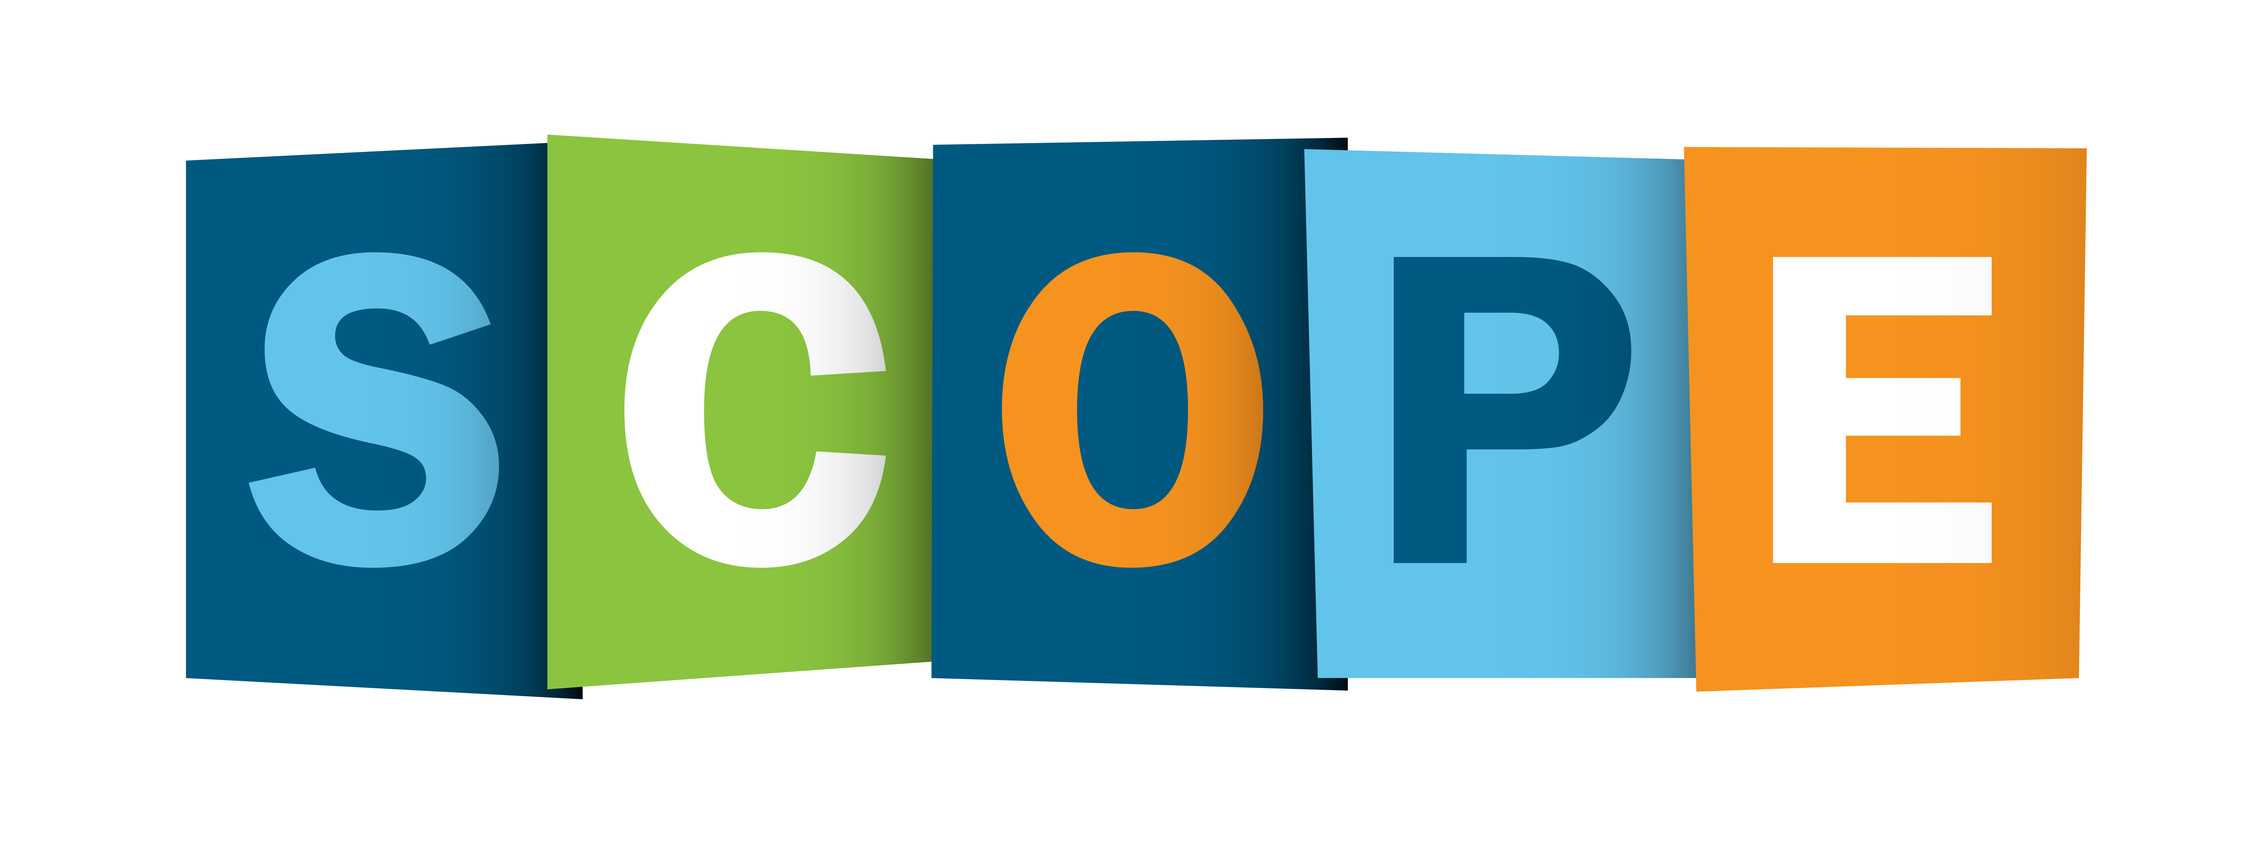 SCOPE Overlapping Letters Vector Icon